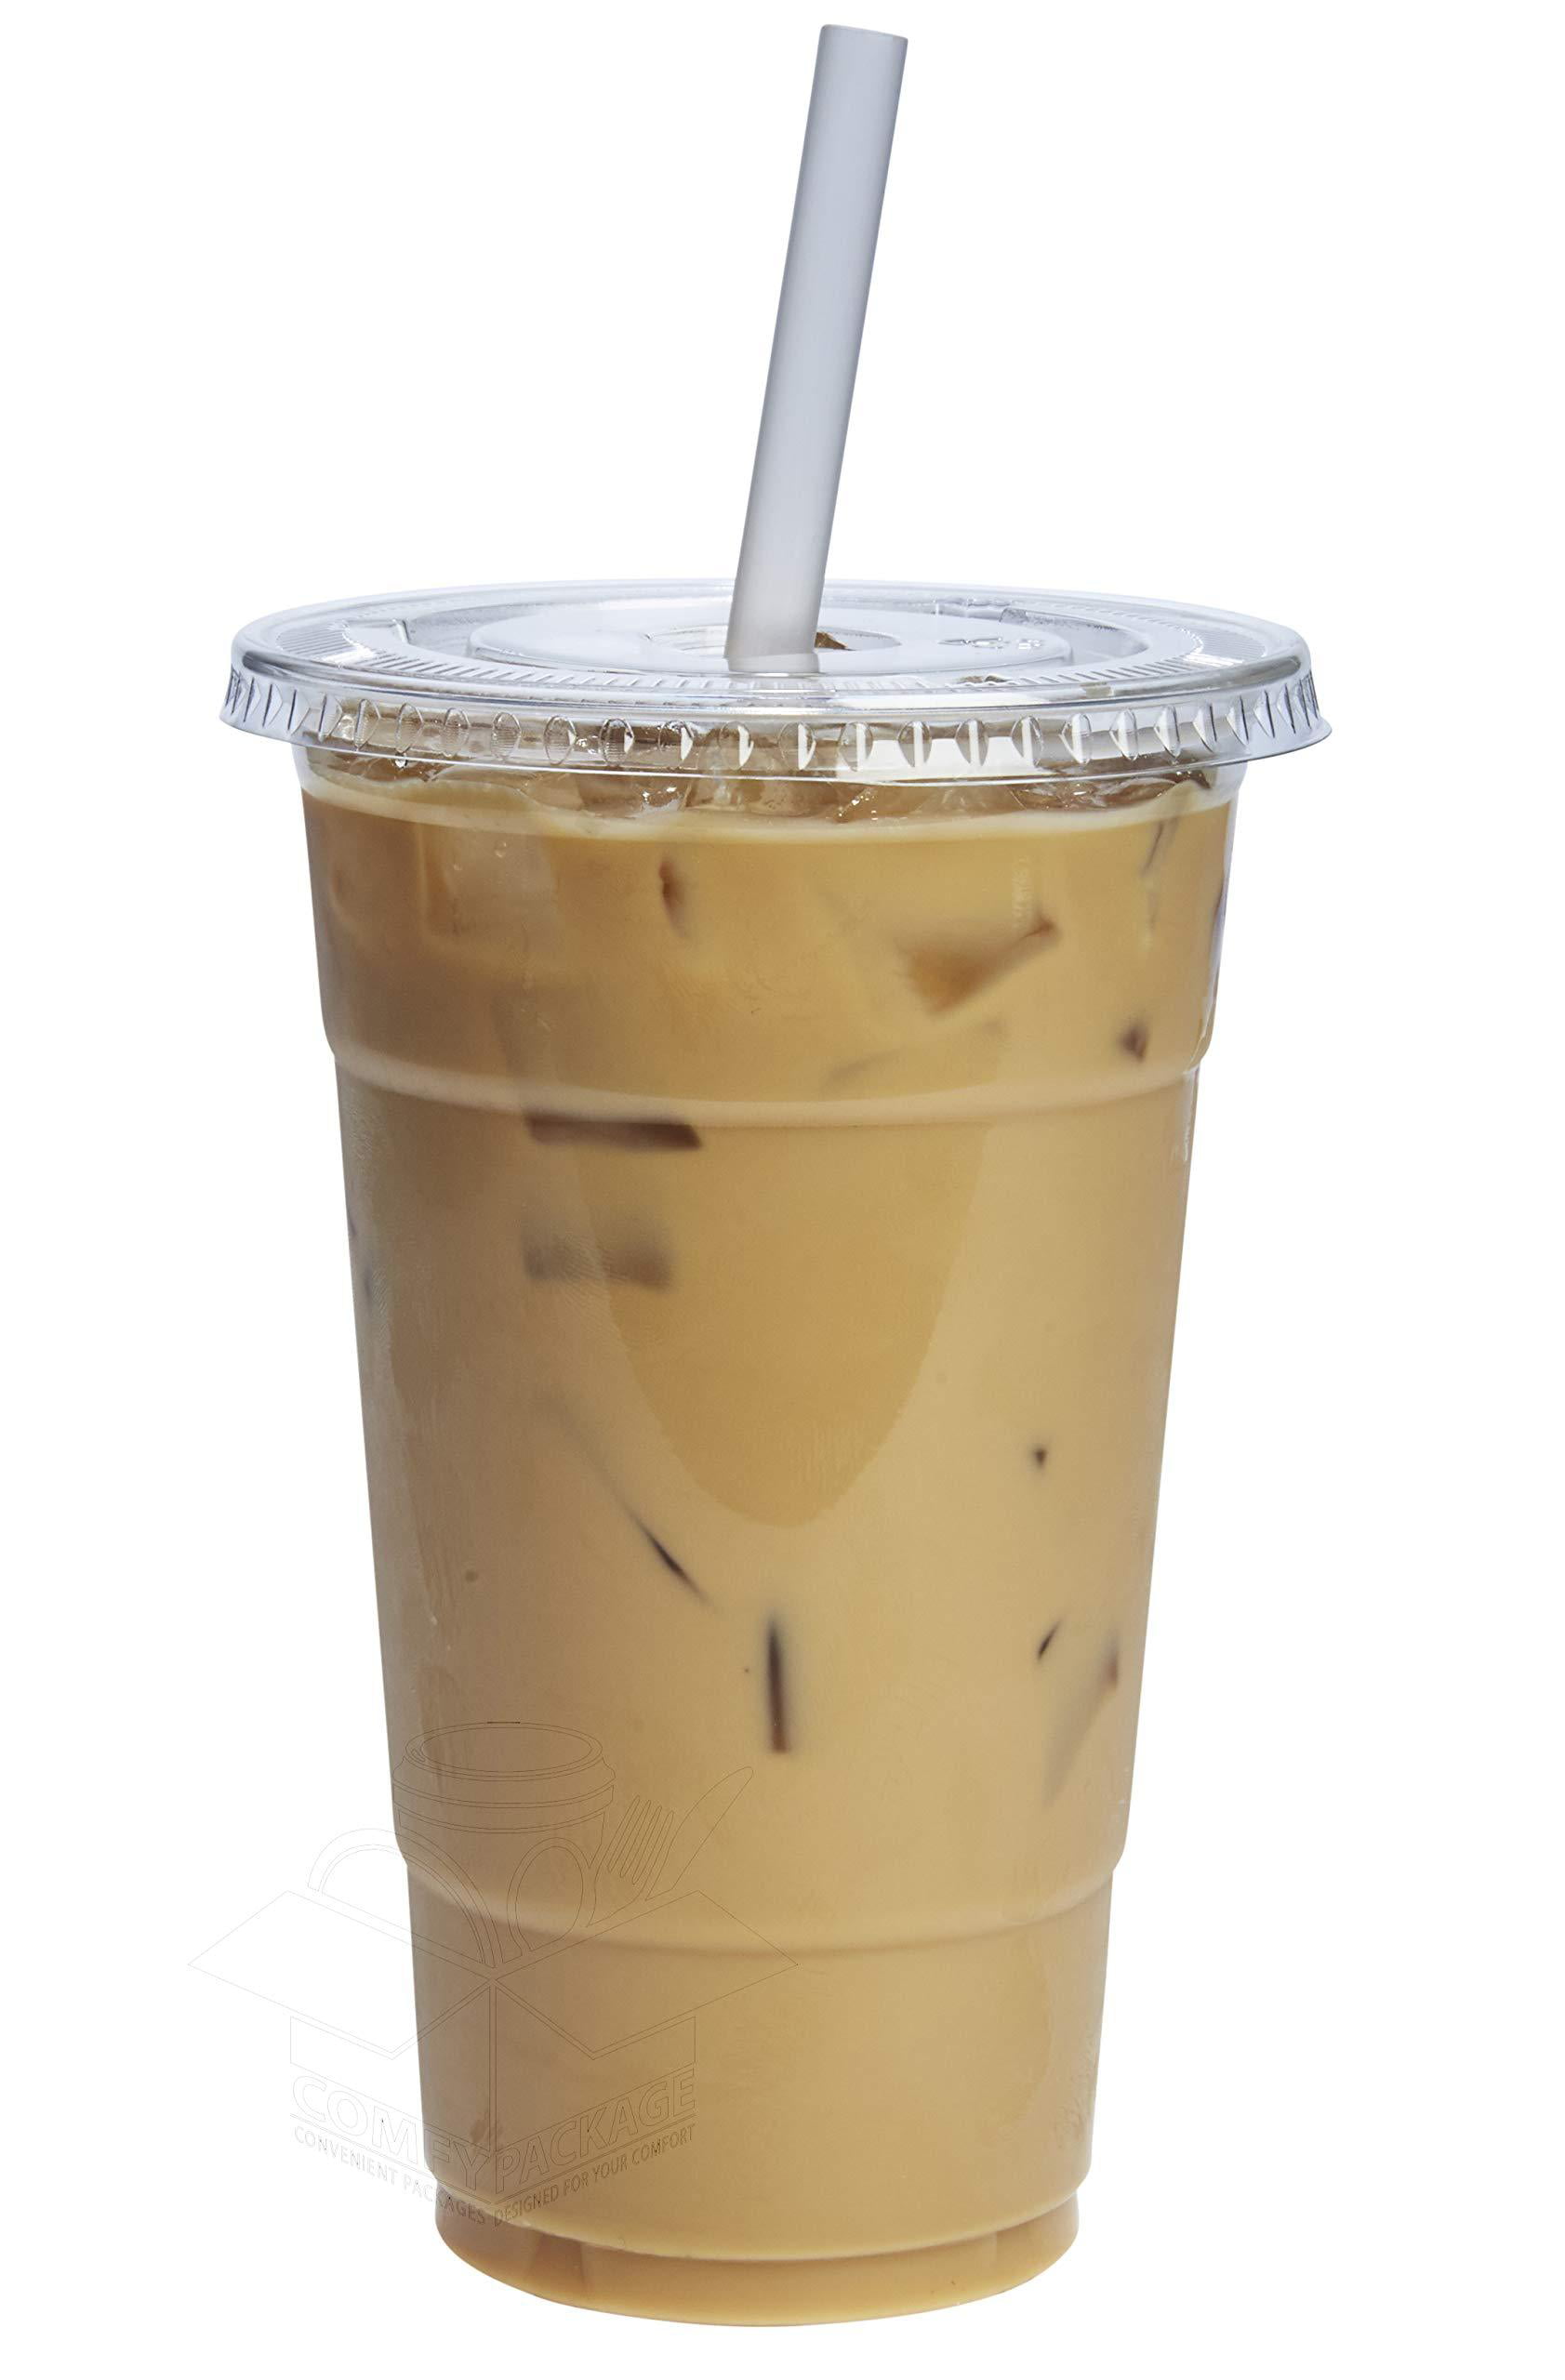 100 Sets 16 oz Plastic CLEAR Cup and Flat LID with Straw Slot 